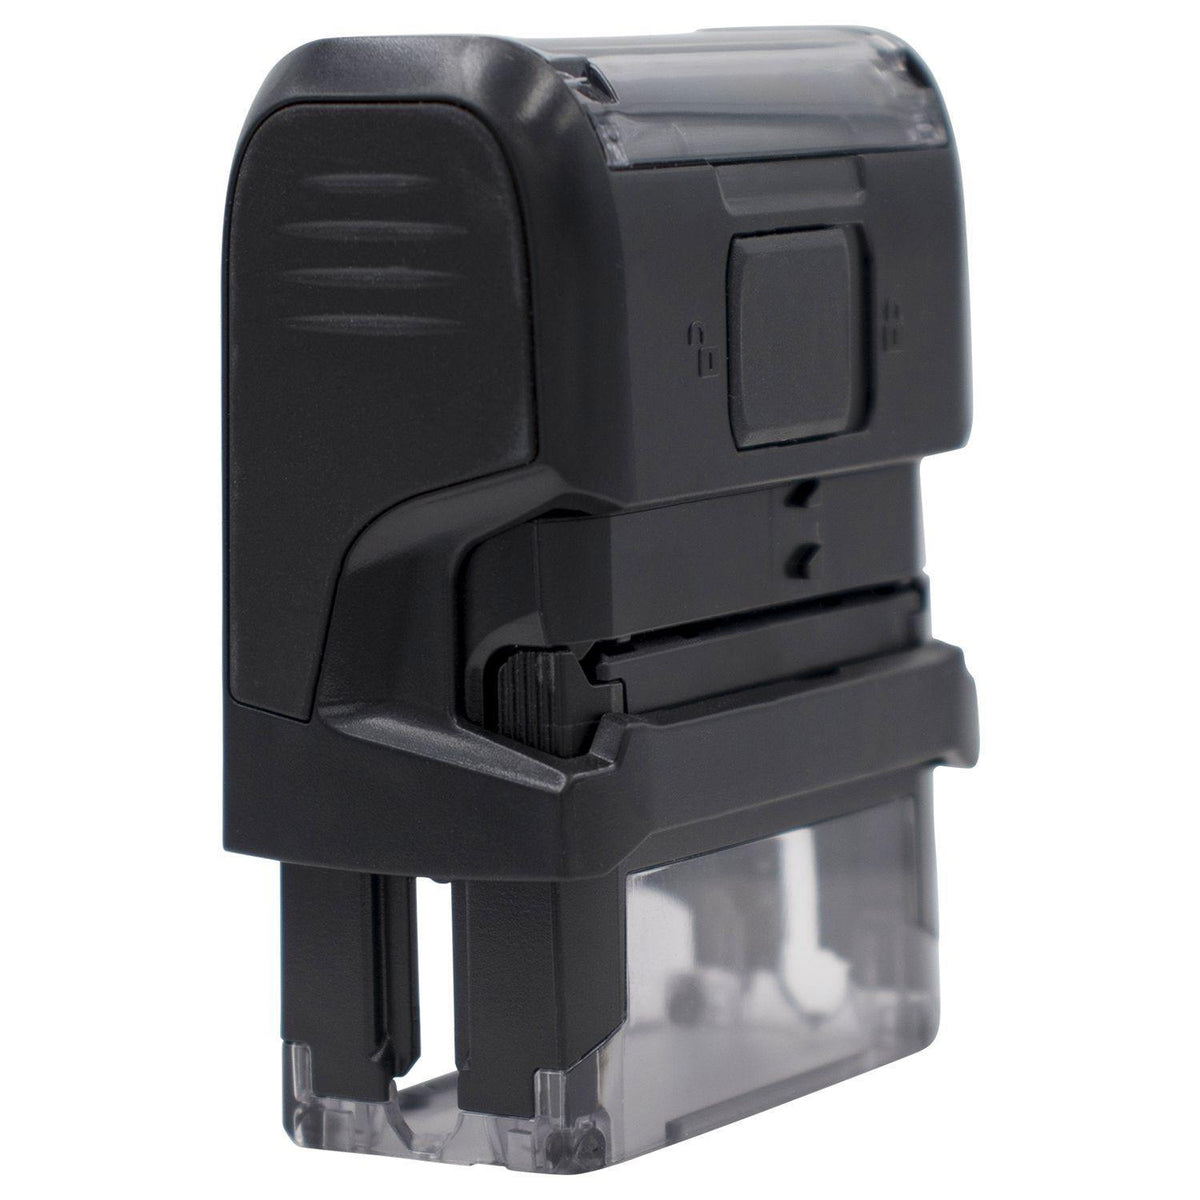 Self-Inking Confidential with Envelope Stamp - Engineer Seal Stamps - Brand_Trodat, Impression Size_Small, Stamp Type_Self-Inking Stamp, Type of Use_Accounting, Type of Use_Legal, Type of Use_Office, Type of Use_Postal &amp; Mailing